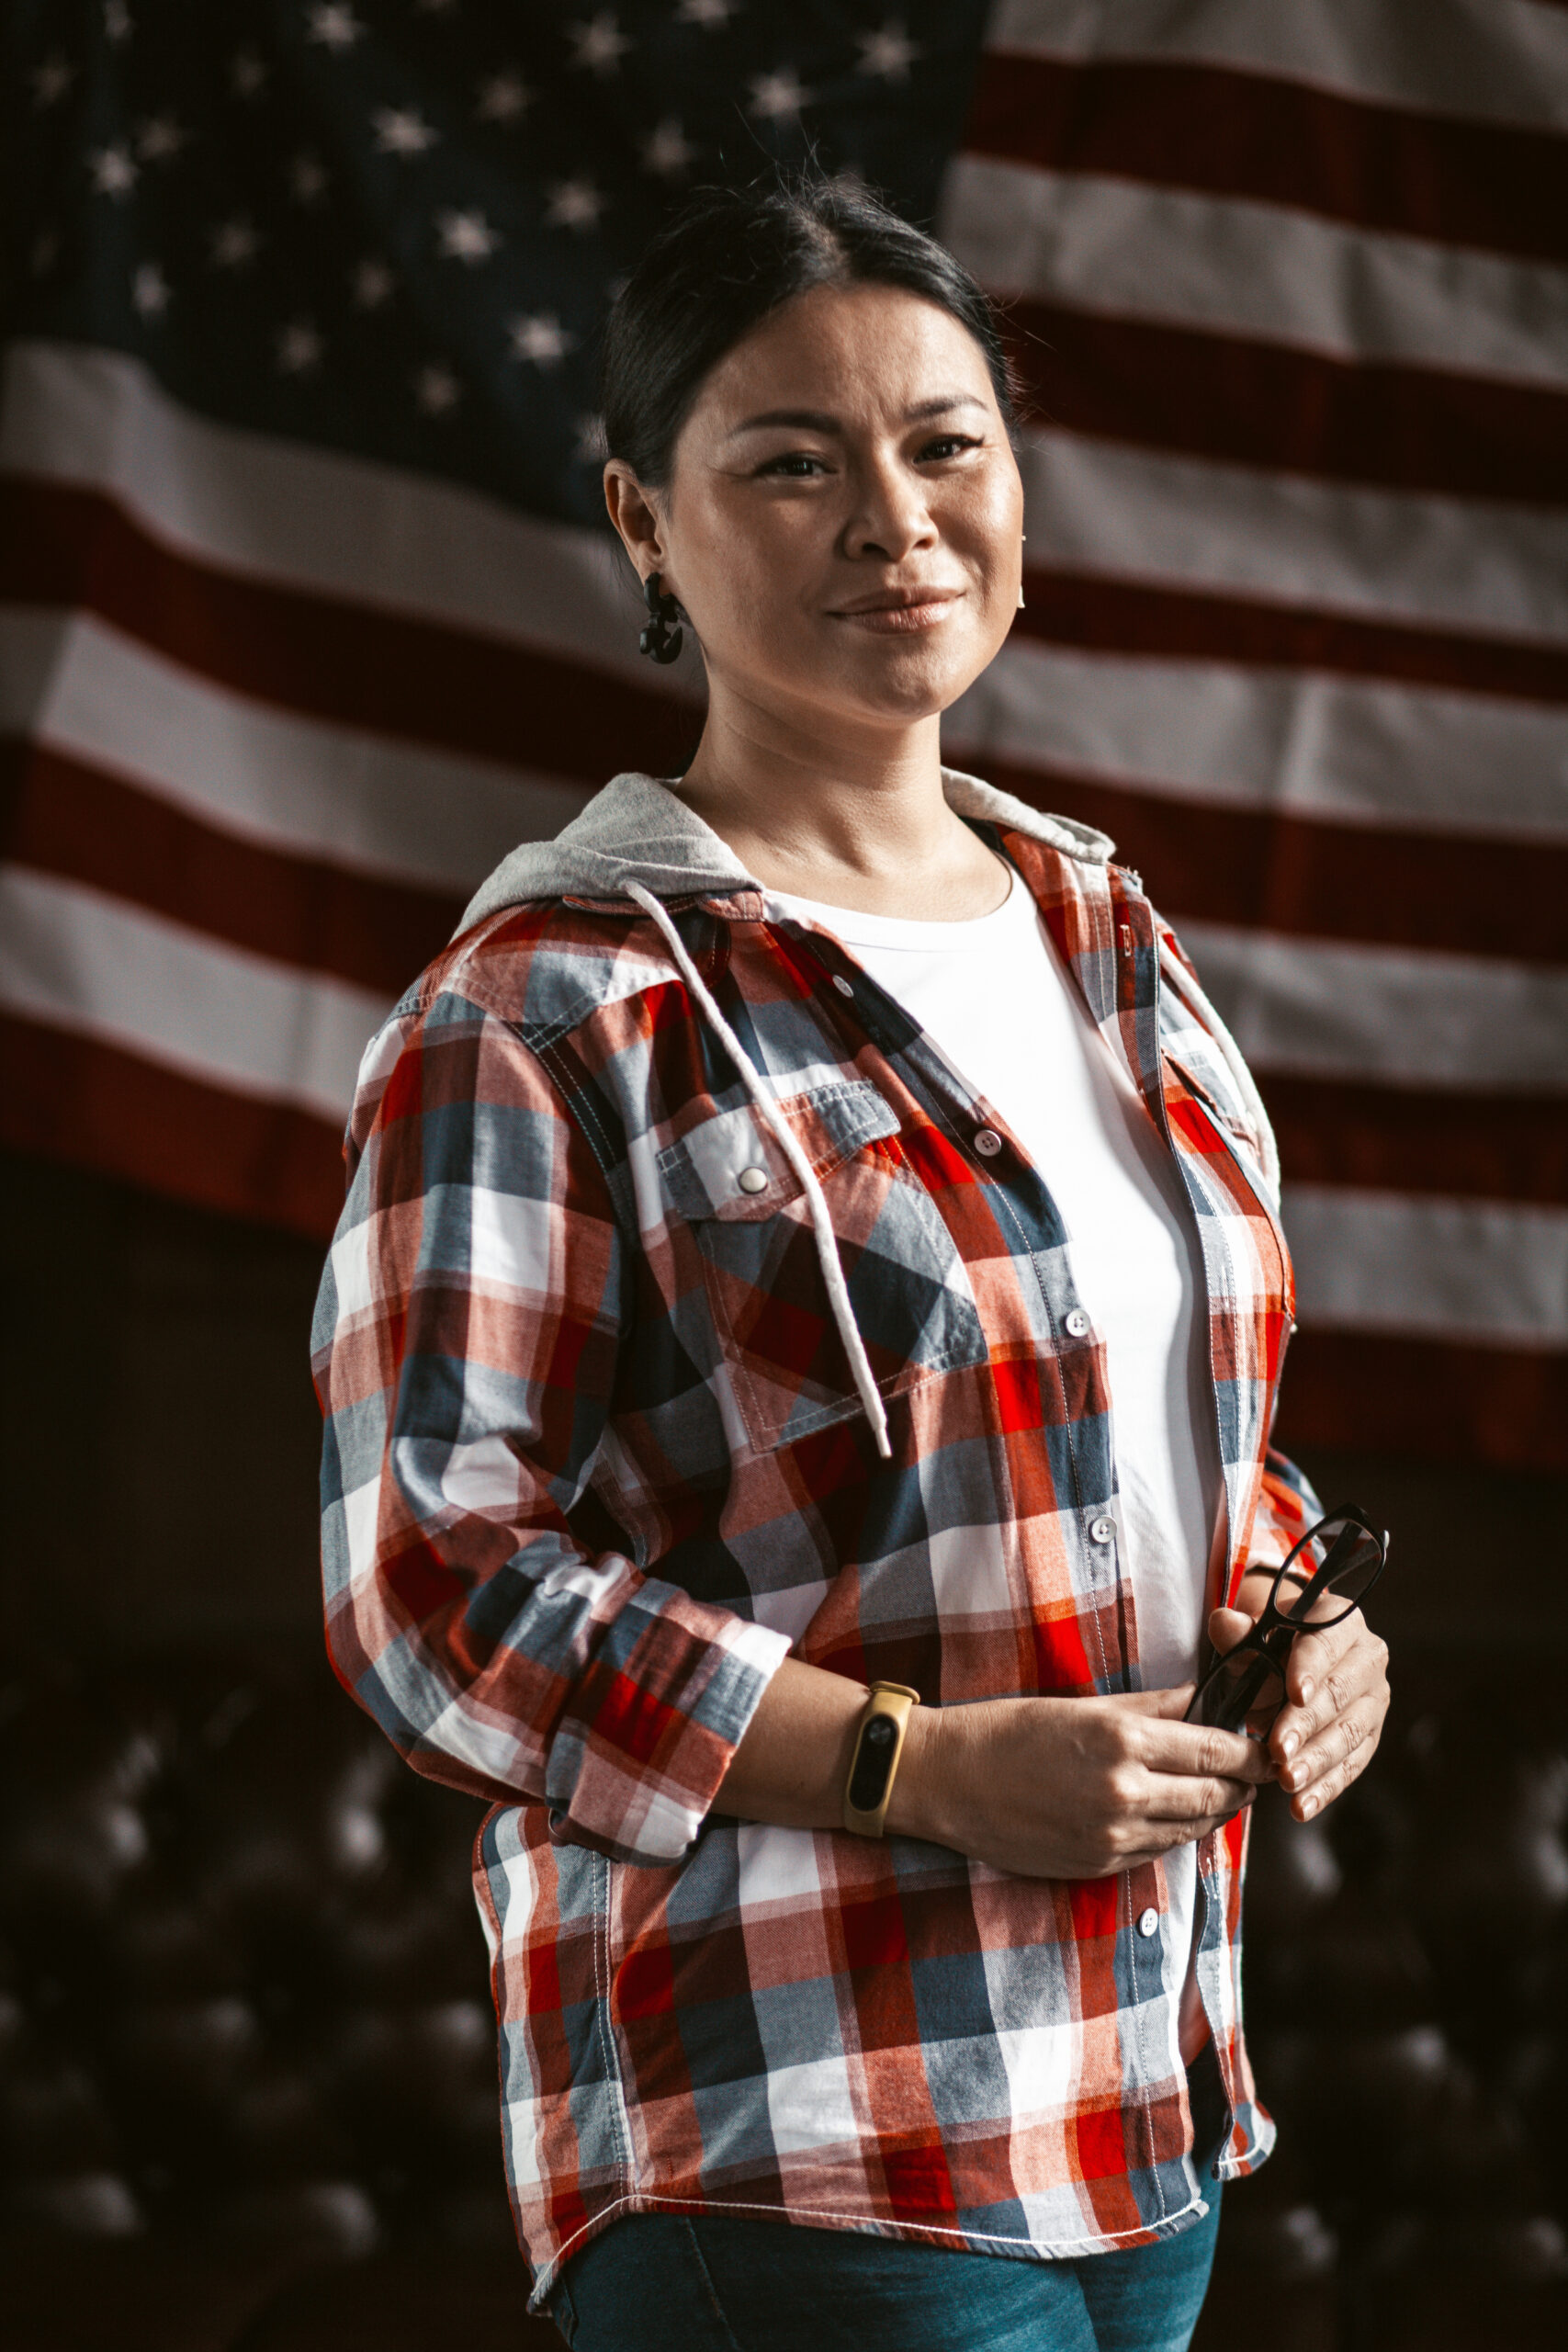 Immigrant in front of American flag